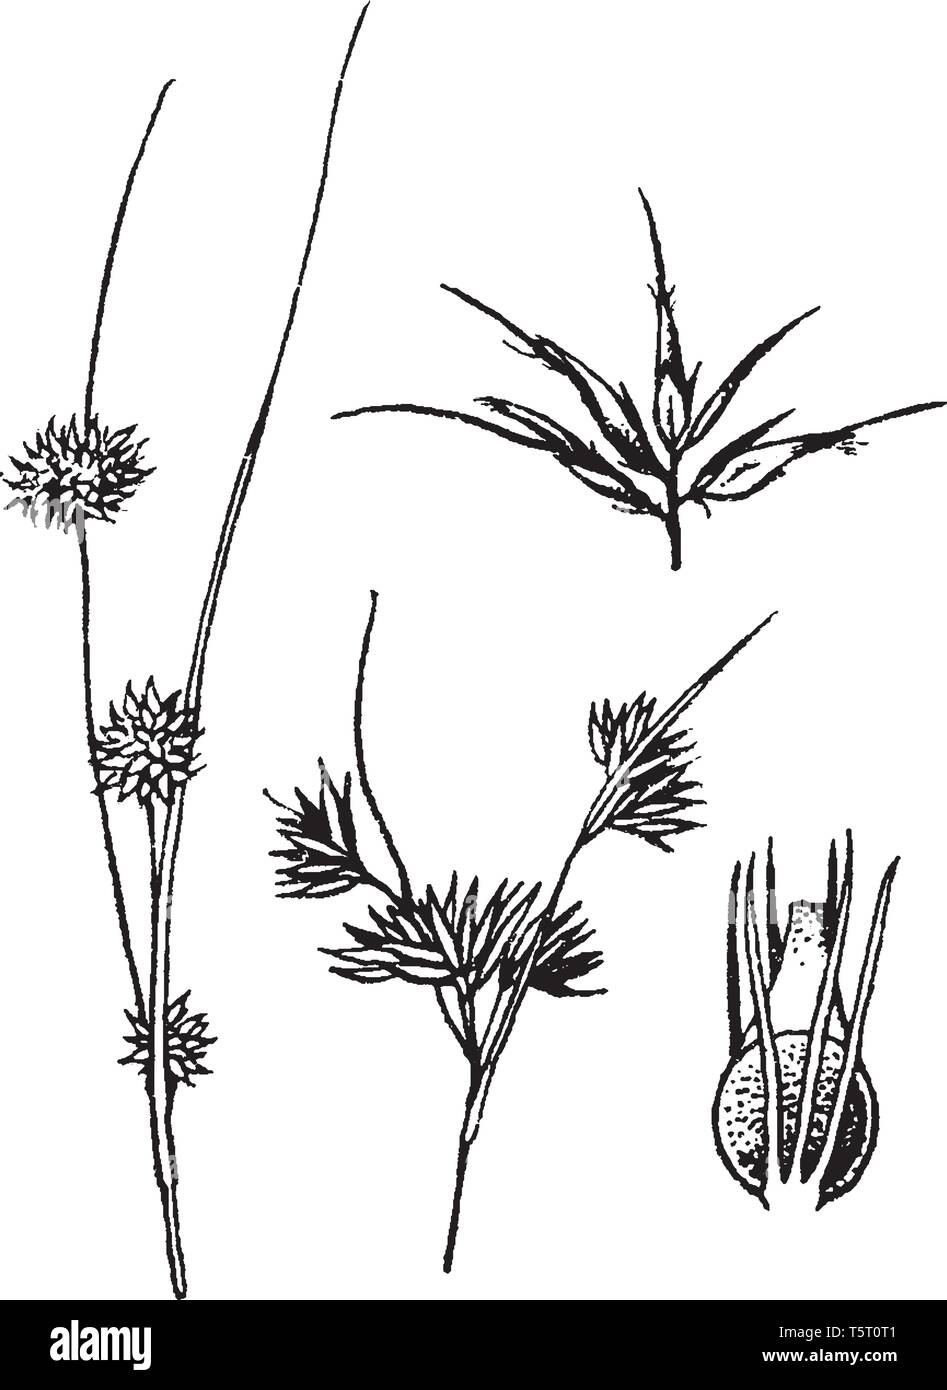 This pictures showing a rhynchospora. The stem is very thin and long, leaves are small and pointy this is from Cyperaceae family, vintage line drawing Stock Vector